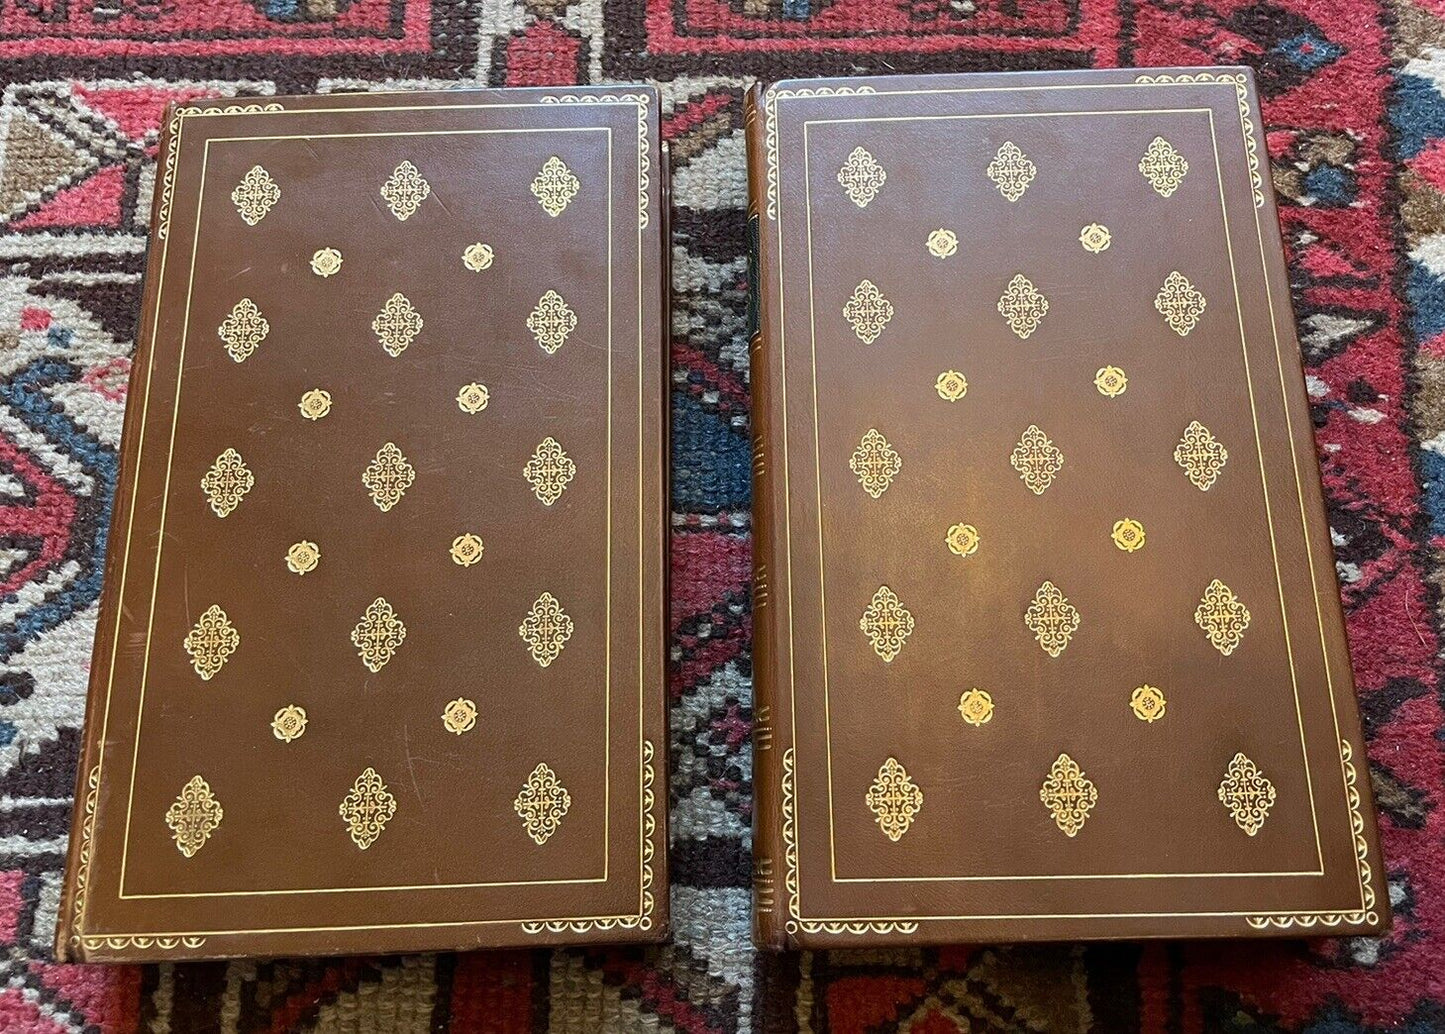 1793 Fables of Aesop (2 Vols) With 112 Engravings : Smart Leather Bindings